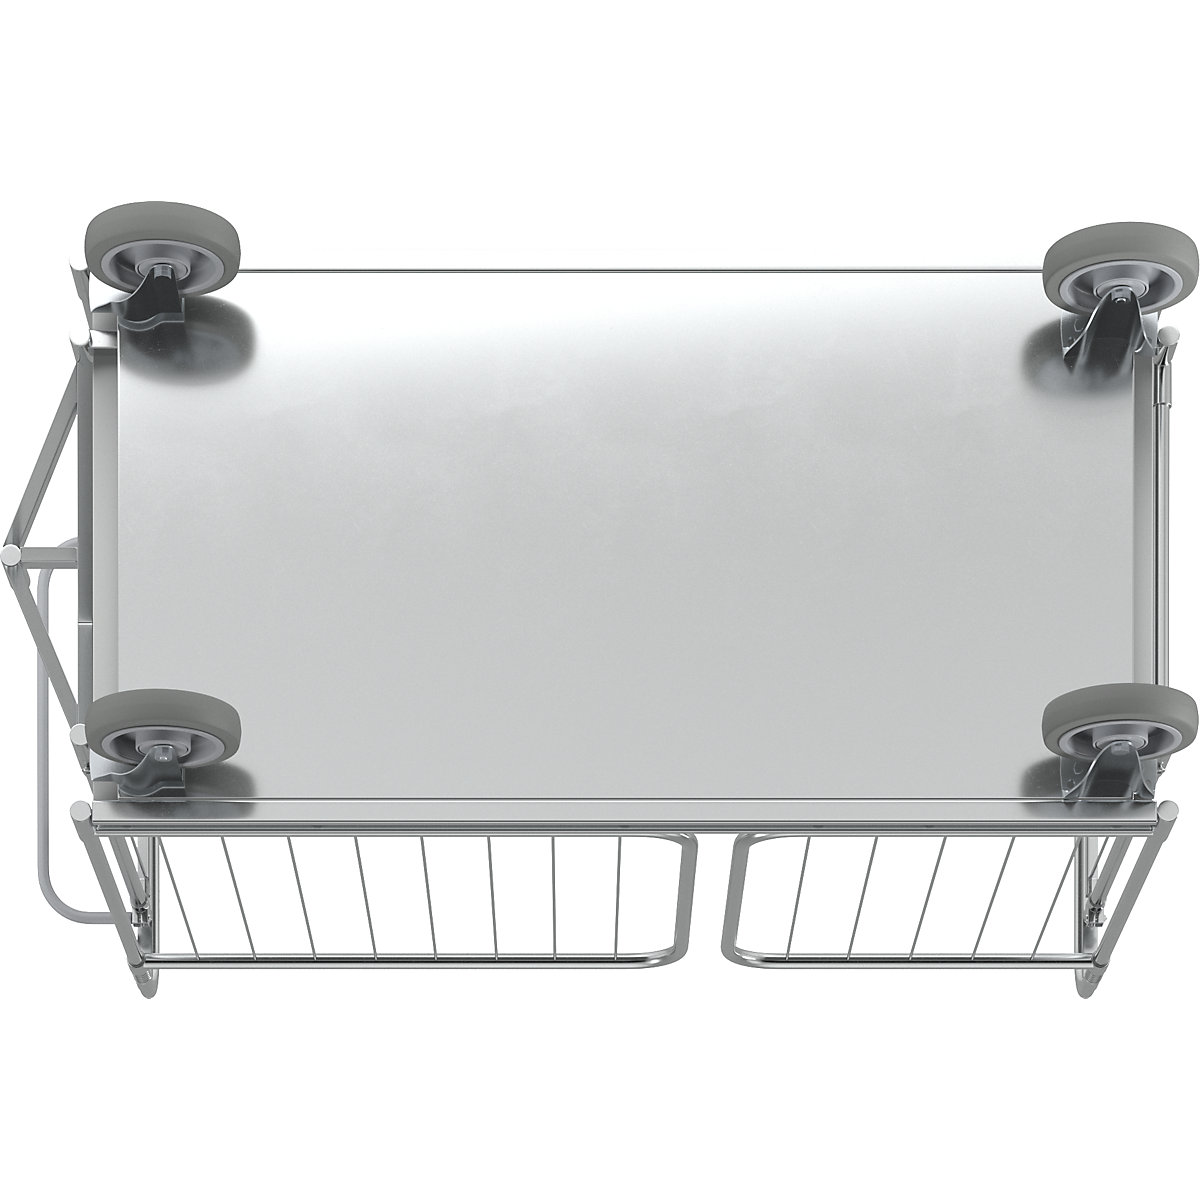 Trolley with panels on four sides – HelgeNyberg (Product illustration 11)-10